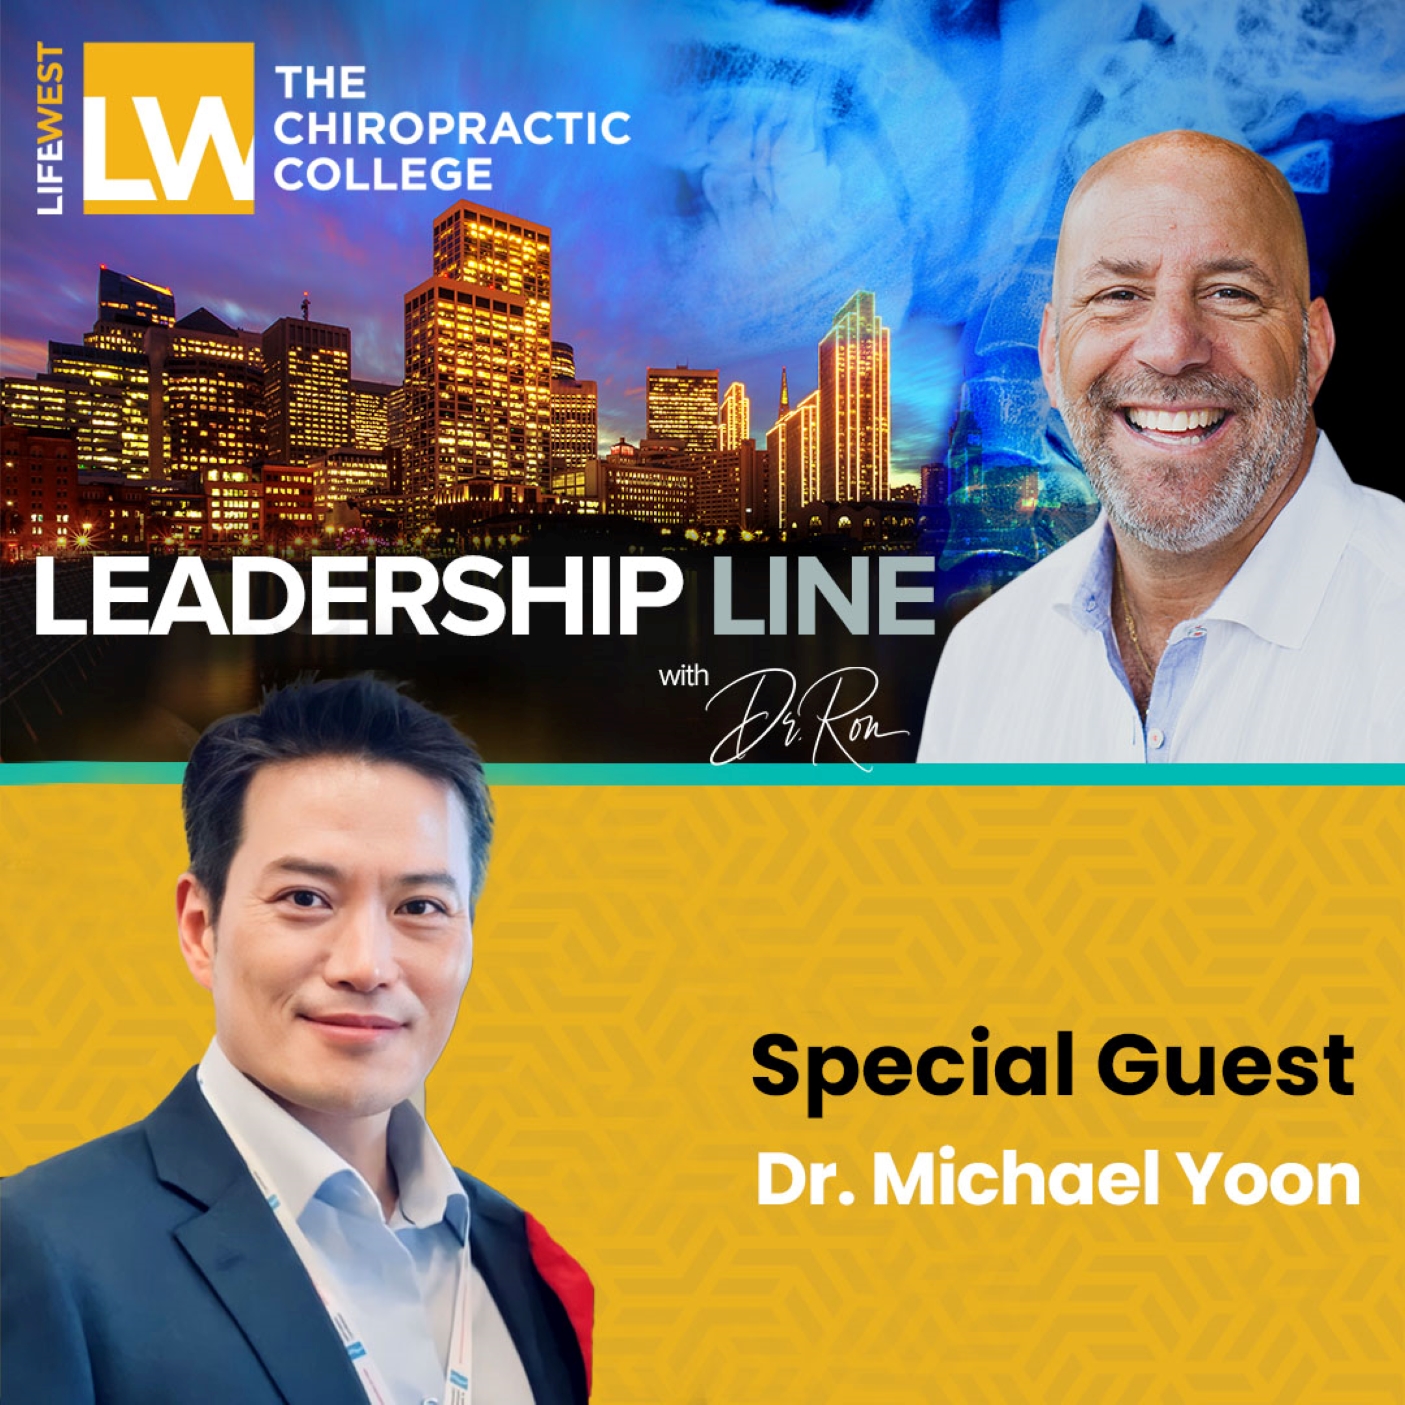 S3 Ep17 Moving Toward World Wellness Through Discipline and Love with Dr. Michael Yoon